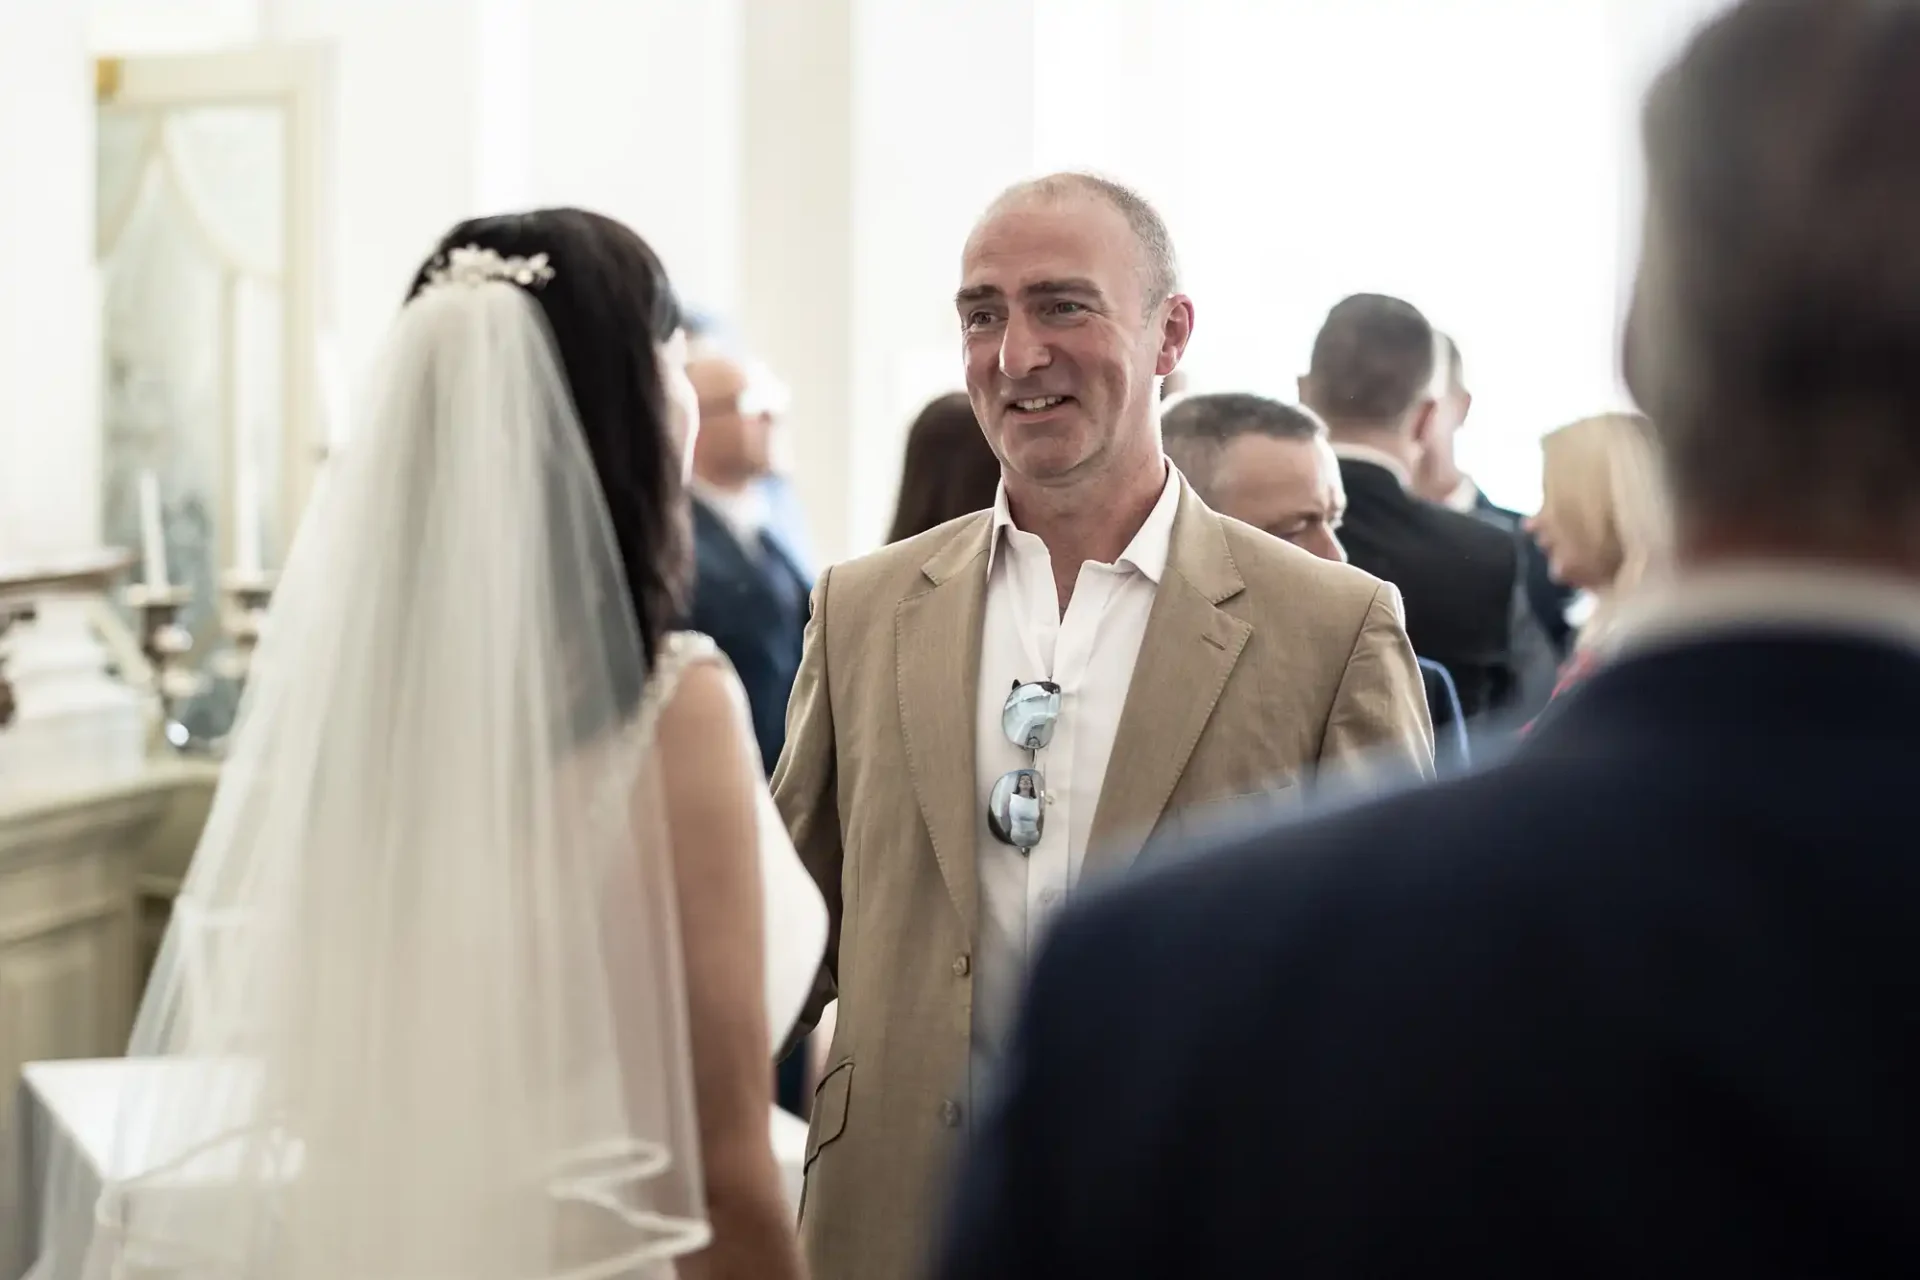 A smiling man in a beige suit at a wedding reception, conversing with guests including a bride in white.